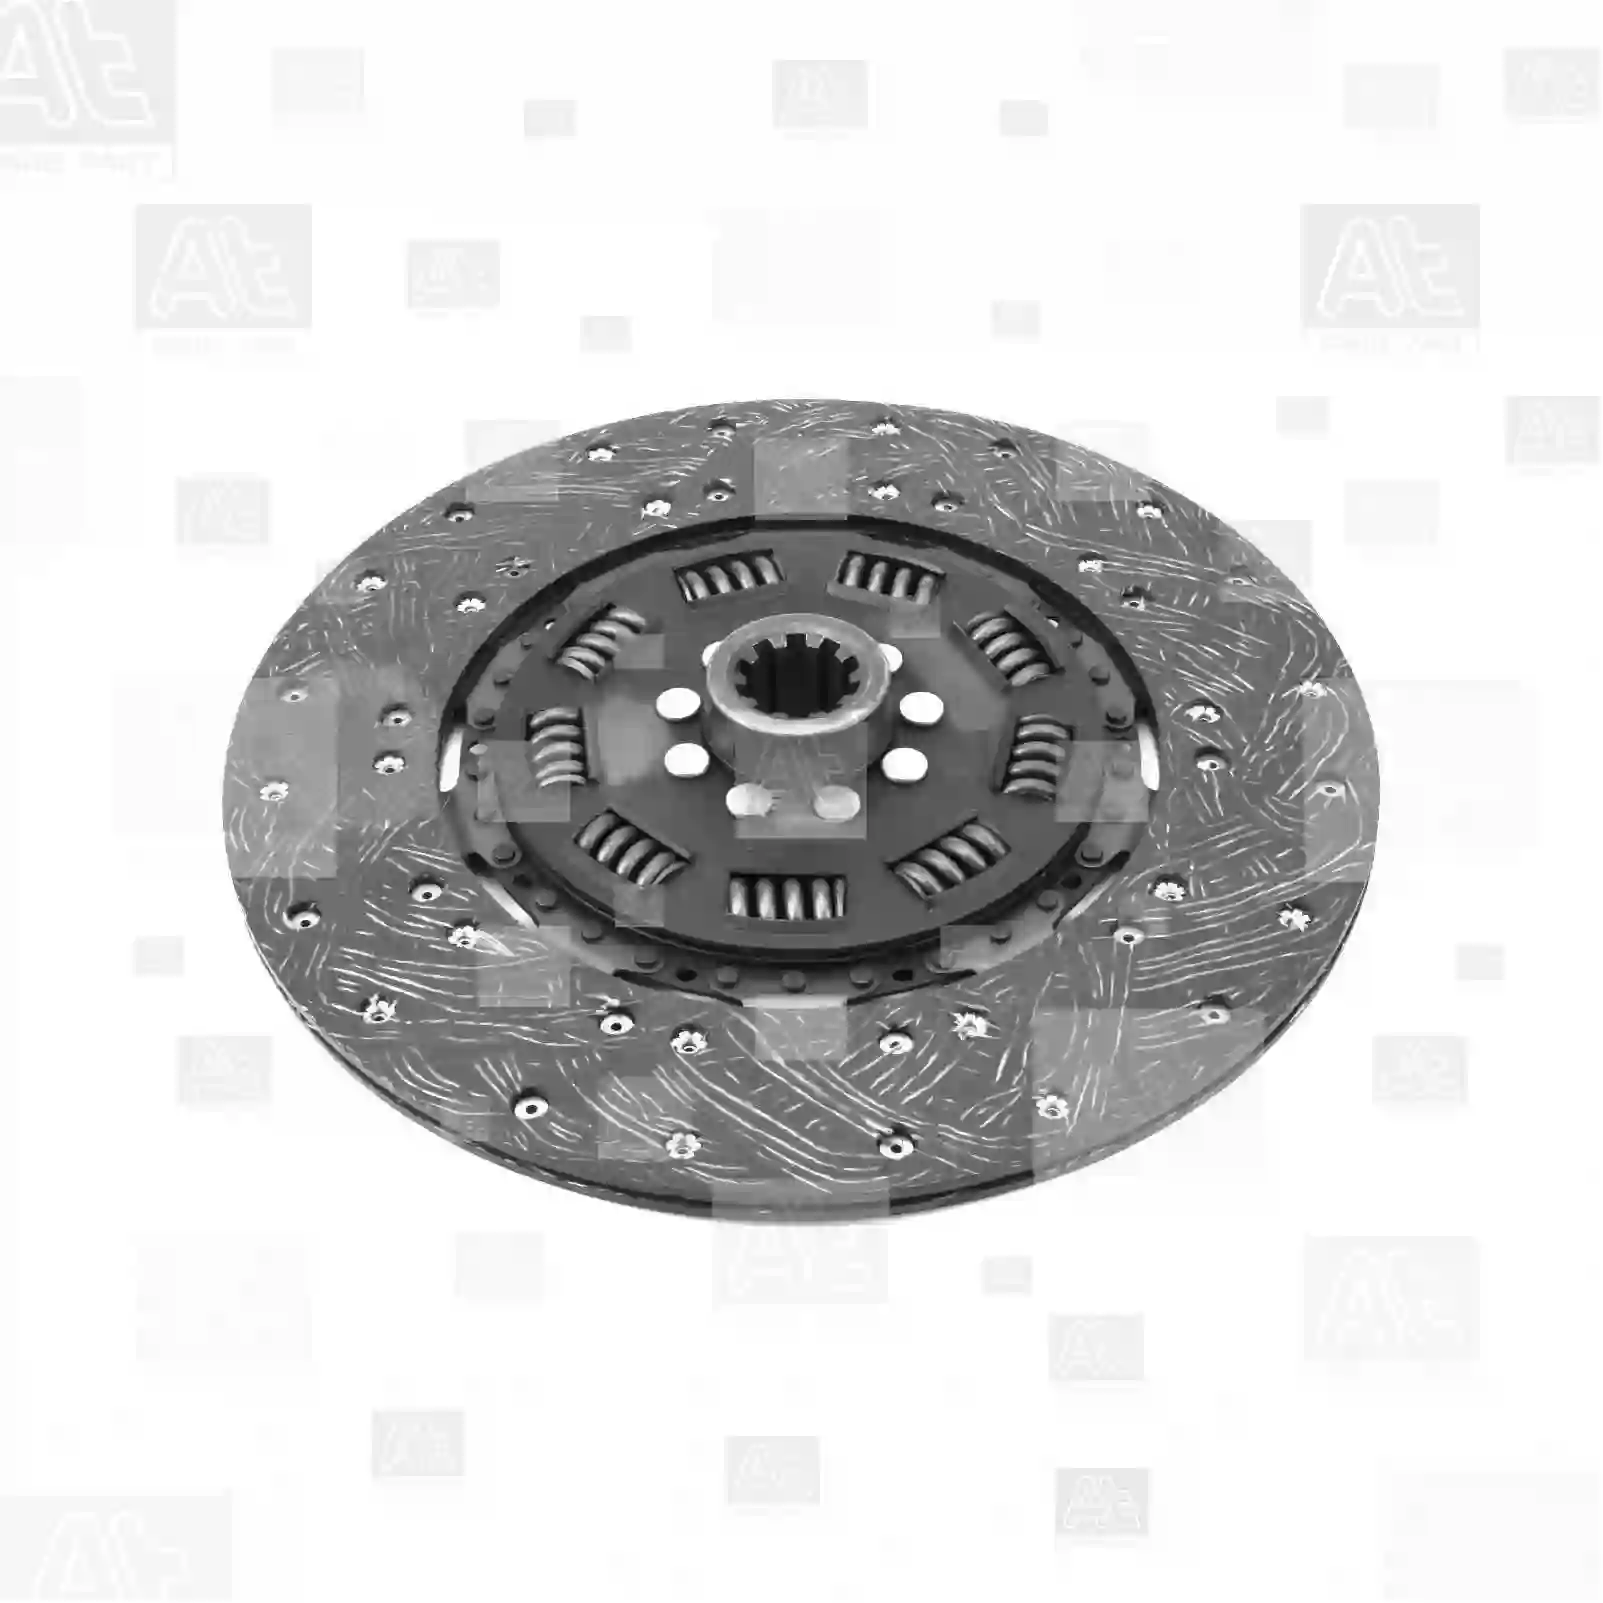 Clutch disc, at no 77722550, oem no: 0286878, 0295427, 0740795, 0740795R, 0751953, 0751953R, 0890094, 1348129, 1348129A, 1348129R, 1395698, 1395698A, 1395698R, 286878, 295427, 740795, 740795A, 740795R, 751953, 751953A, 751953R, 890094, 04459825, 42037235, 42102153, 42102157, 04859168, 04864246, 42037235, 42102153, 42102157, 4859168, 4864246, 81303010203, 81303010212, 81303010288, 81303010294, 040115210, 632101440 At Spare Part | Engine, Accelerator Pedal, Camshaft, Connecting Rod, Crankcase, Crankshaft, Cylinder Head, Engine Suspension Mountings, Exhaust Manifold, Exhaust Gas Recirculation, Filter Kits, Flywheel Housing, General Overhaul Kits, Engine, Intake Manifold, Oil Cleaner, Oil Cooler, Oil Filter, Oil Pump, Oil Sump, Piston & Liner, Sensor & Switch, Timing Case, Turbocharger, Cooling System, Belt Tensioner, Coolant Filter, Coolant Pipe, Corrosion Prevention Agent, Drive, Expansion Tank, Fan, Intercooler, Monitors & Gauges, Radiator, Thermostat, V-Belt / Timing belt, Water Pump, Fuel System, Electronical Injector Unit, Feed Pump, Fuel Filter, cpl., Fuel Gauge Sender,  Fuel Line, Fuel Pump, Fuel Tank, Injection Line Kit, Injection Pump, Exhaust System, Clutch & Pedal, Gearbox, Propeller Shaft, Axles, Brake System, Hubs & Wheels, Suspension, Leaf Spring, Universal Parts / Accessories, Steering, Electrical System, Cabin Clutch disc, at no 77722550, oem no: 0286878, 0295427, 0740795, 0740795R, 0751953, 0751953R, 0890094, 1348129, 1348129A, 1348129R, 1395698, 1395698A, 1395698R, 286878, 295427, 740795, 740795A, 740795R, 751953, 751953A, 751953R, 890094, 04459825, 42037235, 42102153, 42102157, 04859168, 04864246, 42037235, 42102153, 42102157, 4859168, 4864246, 81303010203, 81303010212, 81303010288, 81303010294, 040115210, 632101440 At Spare Part | Engine, Accelerator Pedal, Camshaft, Connecting Rod, Crankcase, Crankshaft, Cylinder Head, Engine Suspension Mountings, Exhaust Manifold, Exhaust Gas Recirculation, Filter Kits, Flywheel Housing, General Overhaul Kits, Engine, Intake Manifold, Oil Cleaner, Oil Cooler, Oil Filter, Oil Pump, Oil Sump, Piston & Liner, Sensor & Switch, Timing Case, Turbocharger, Cooling System, Belt Tensioner, Coolant Filter, Coolant Pipe, Corrosion Prevention Agent, Drive, Expansion Tank, Fan, Intercooler, Monitors & Gauges, Radiator, Thermostat, V-Belt / Timing belt, Water Pump, Fuel System, Electronical Injector Unit, Feed Pump, Fuel Filter, cpl., Fuel Gauge Sender,  Fuel Line, Fuel Pump, Fuel Tank, Injection Line Kit, Injection Pump, Exhaust System, Clutch & Pedal, Gearbox, Propeller Shaft, Axles, Brake System, Hubs & Wheels, Suspension, Leaf Spring, Universal Parts / Accessories, Steering, Electrical System, Cabin